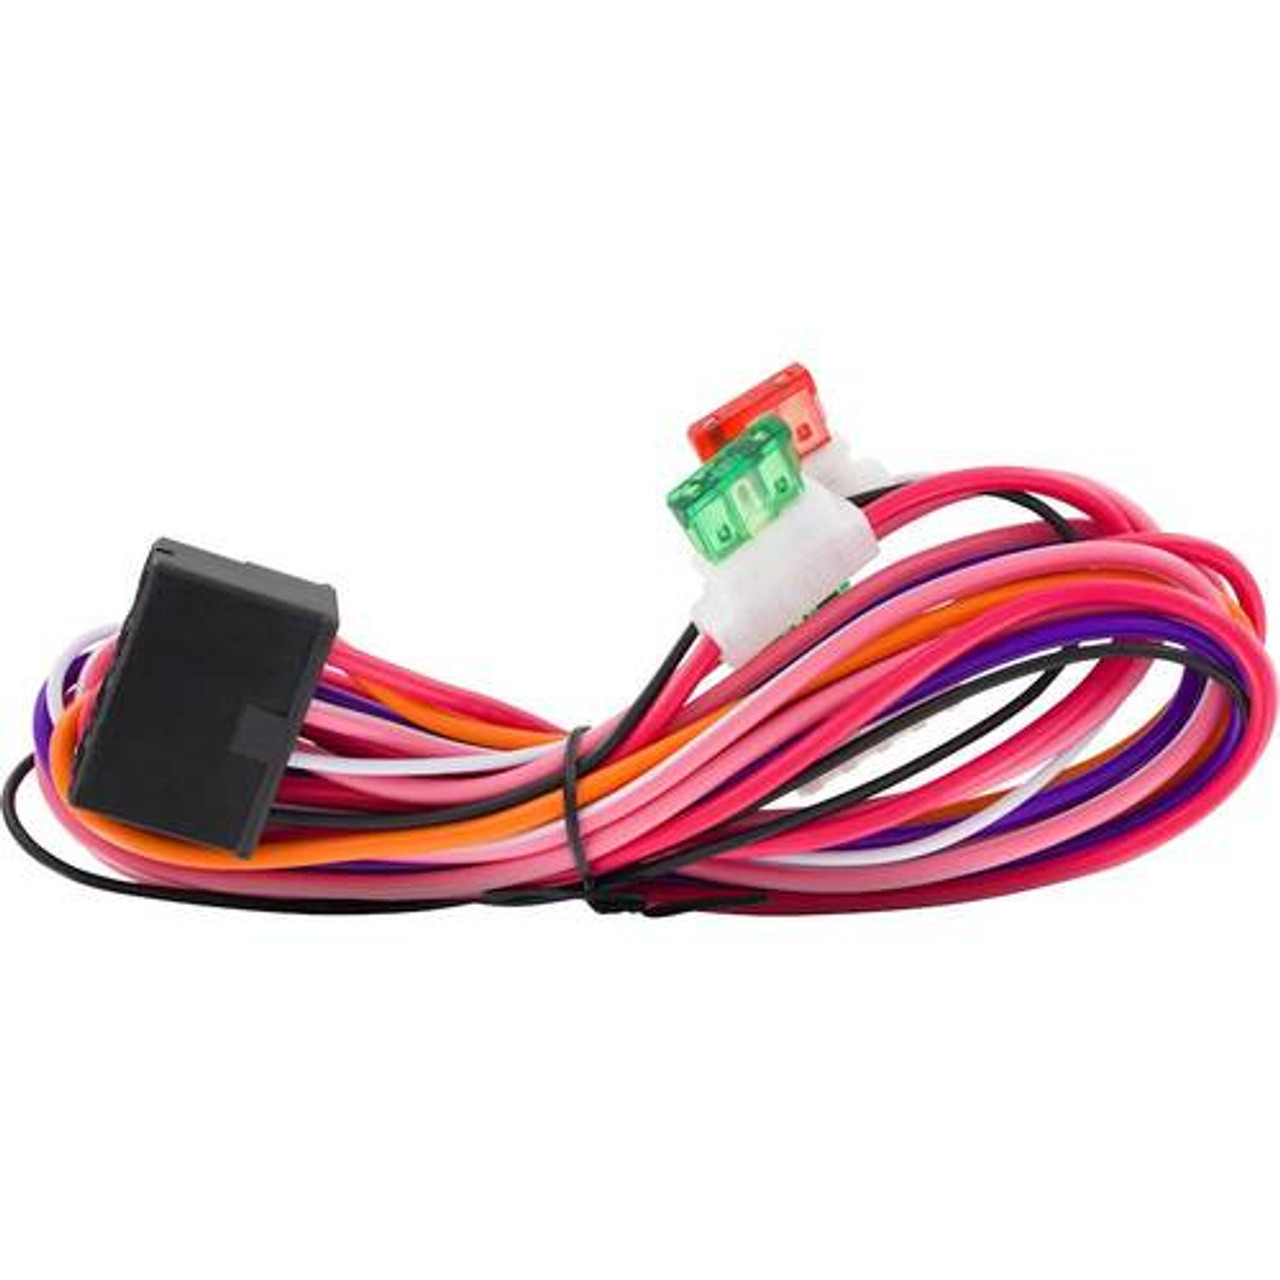 Compustar - High-Current Hardwire Harness for Most Vehicles - Black